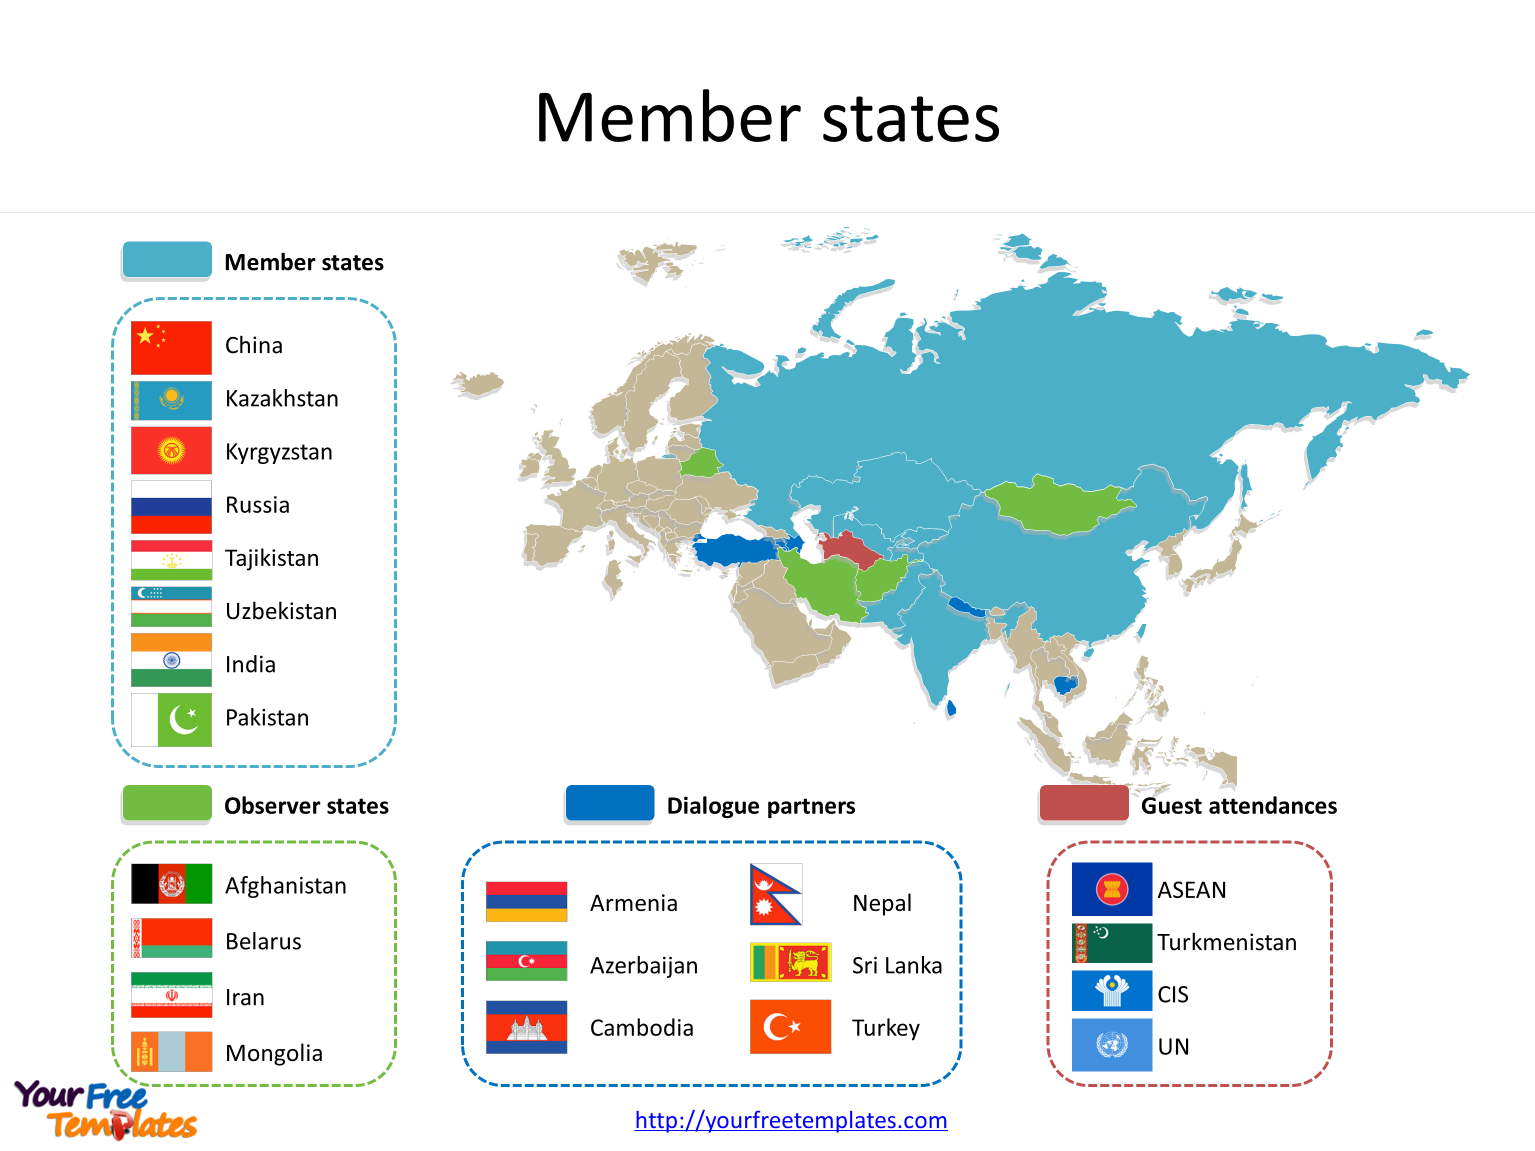 Shanghai Cooperation Organization (SCO) with four activities